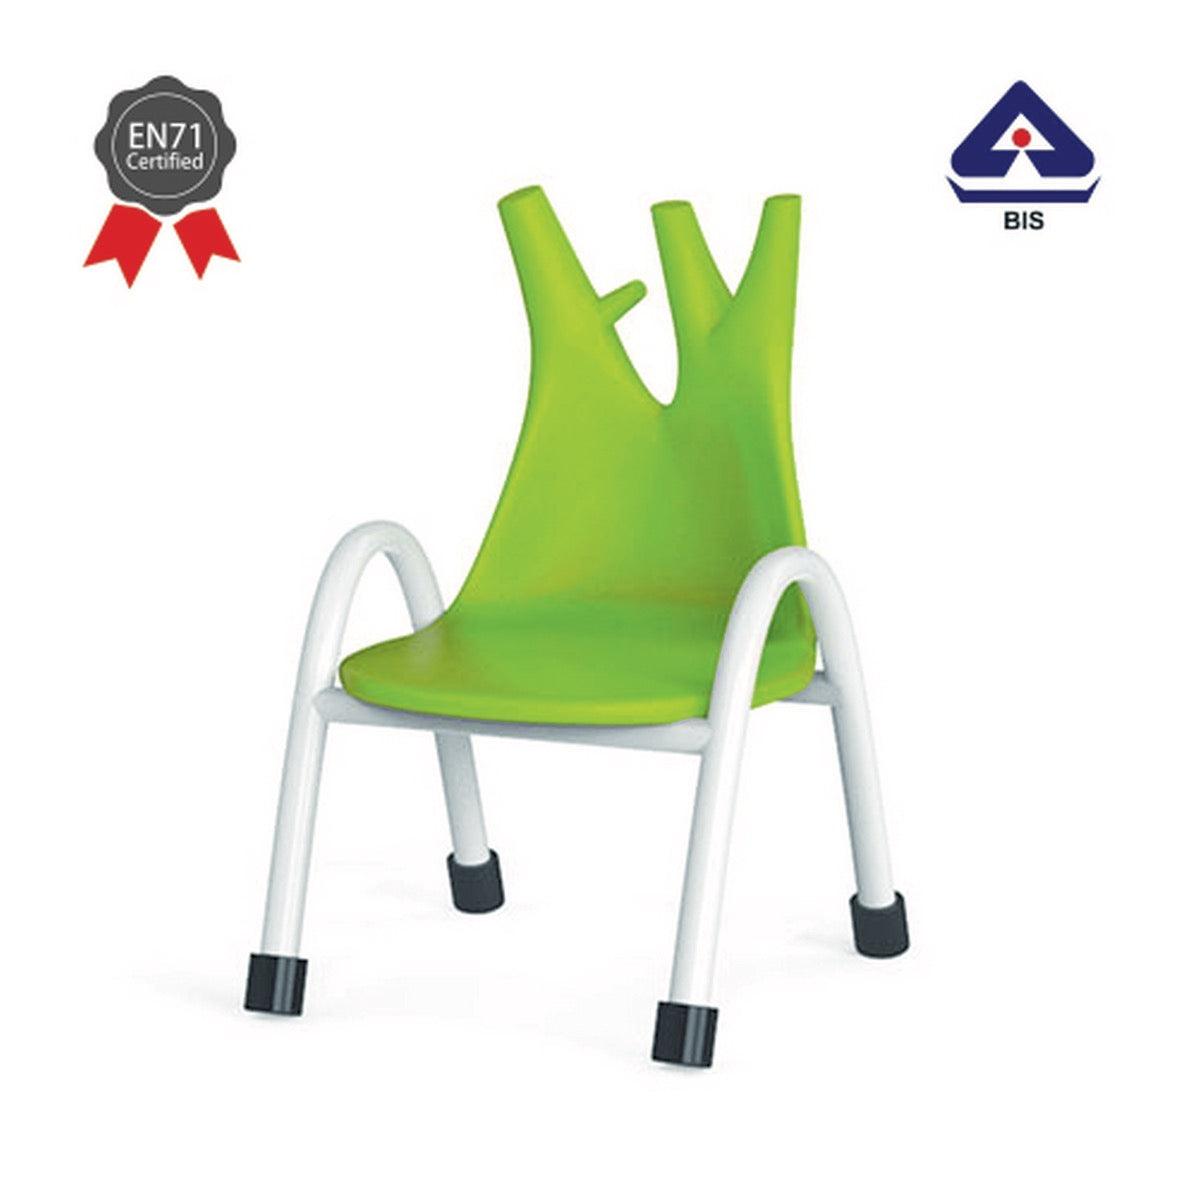 Ok Play Trunk Chair, Study Chair, Sturdy And Durable Chair, Plastic Chair, Perfect For Home, Creches And School, Green, 5 to 10 Years, Height 12 Inches